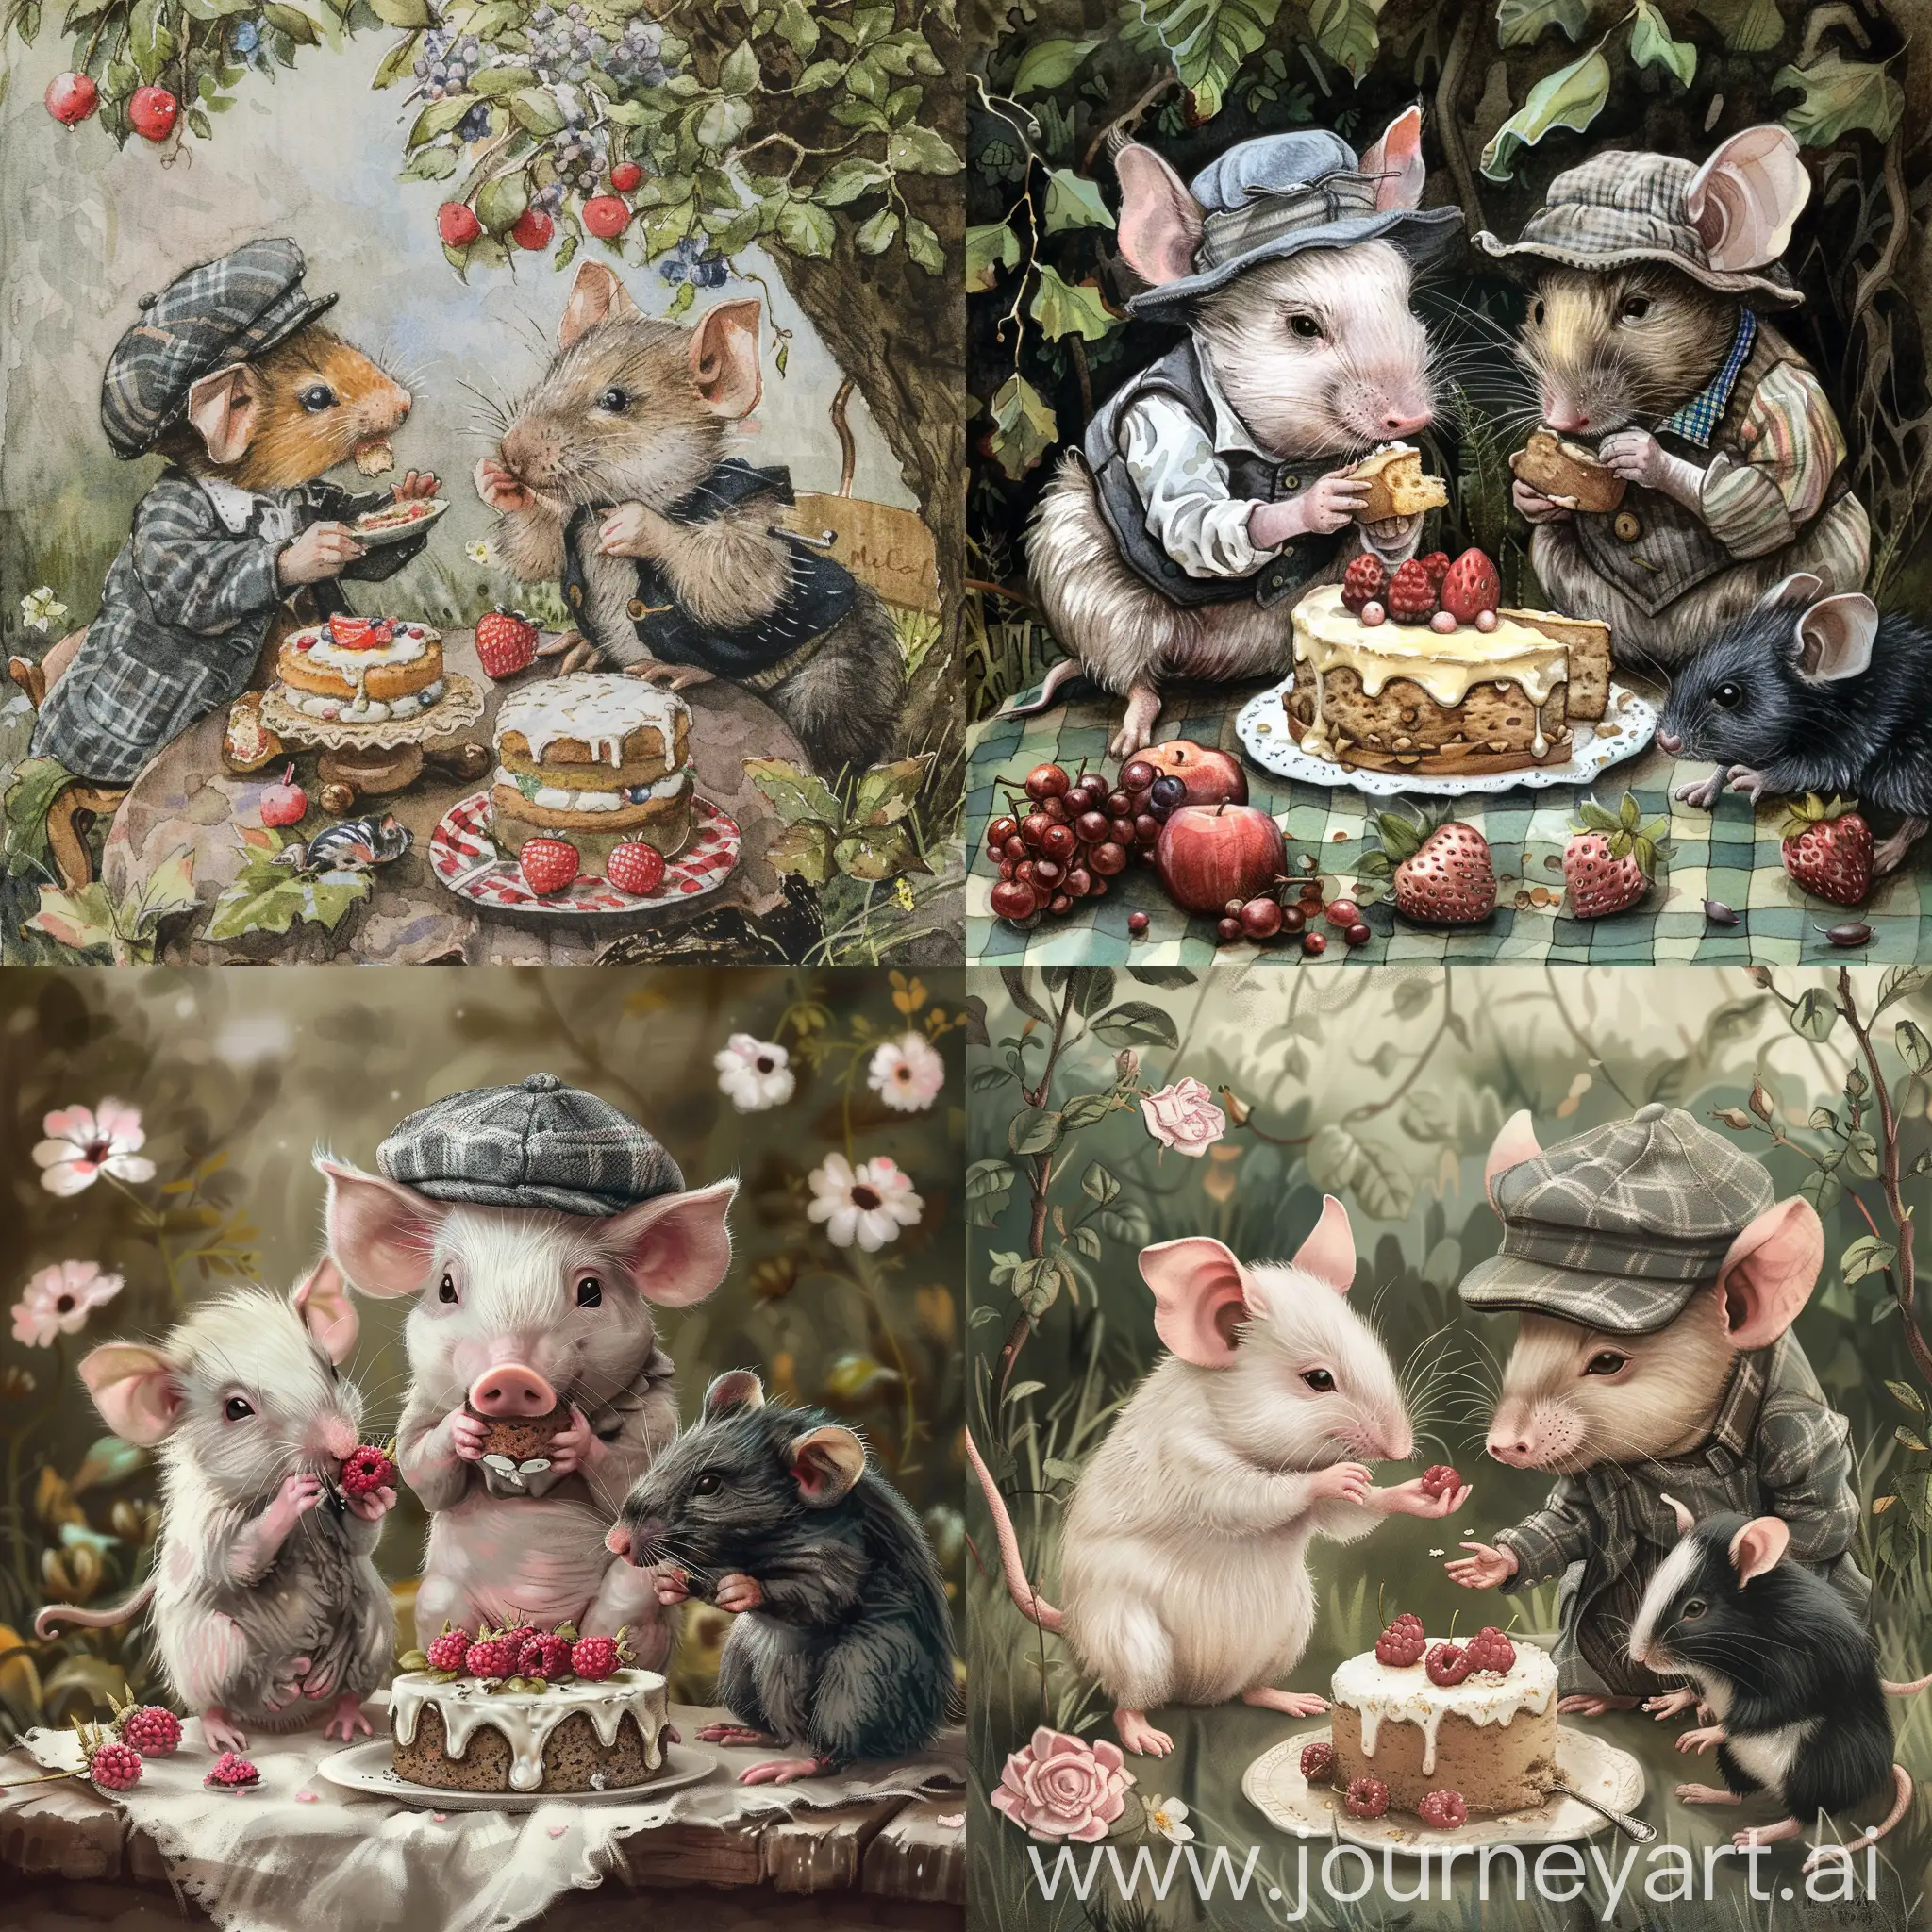 Cute Piglet in gray tweed  cap eating cake, together  with cute baby girl rat and baby boy mole with black fur, in idyllic garden, in the style of Beatrix Potter 